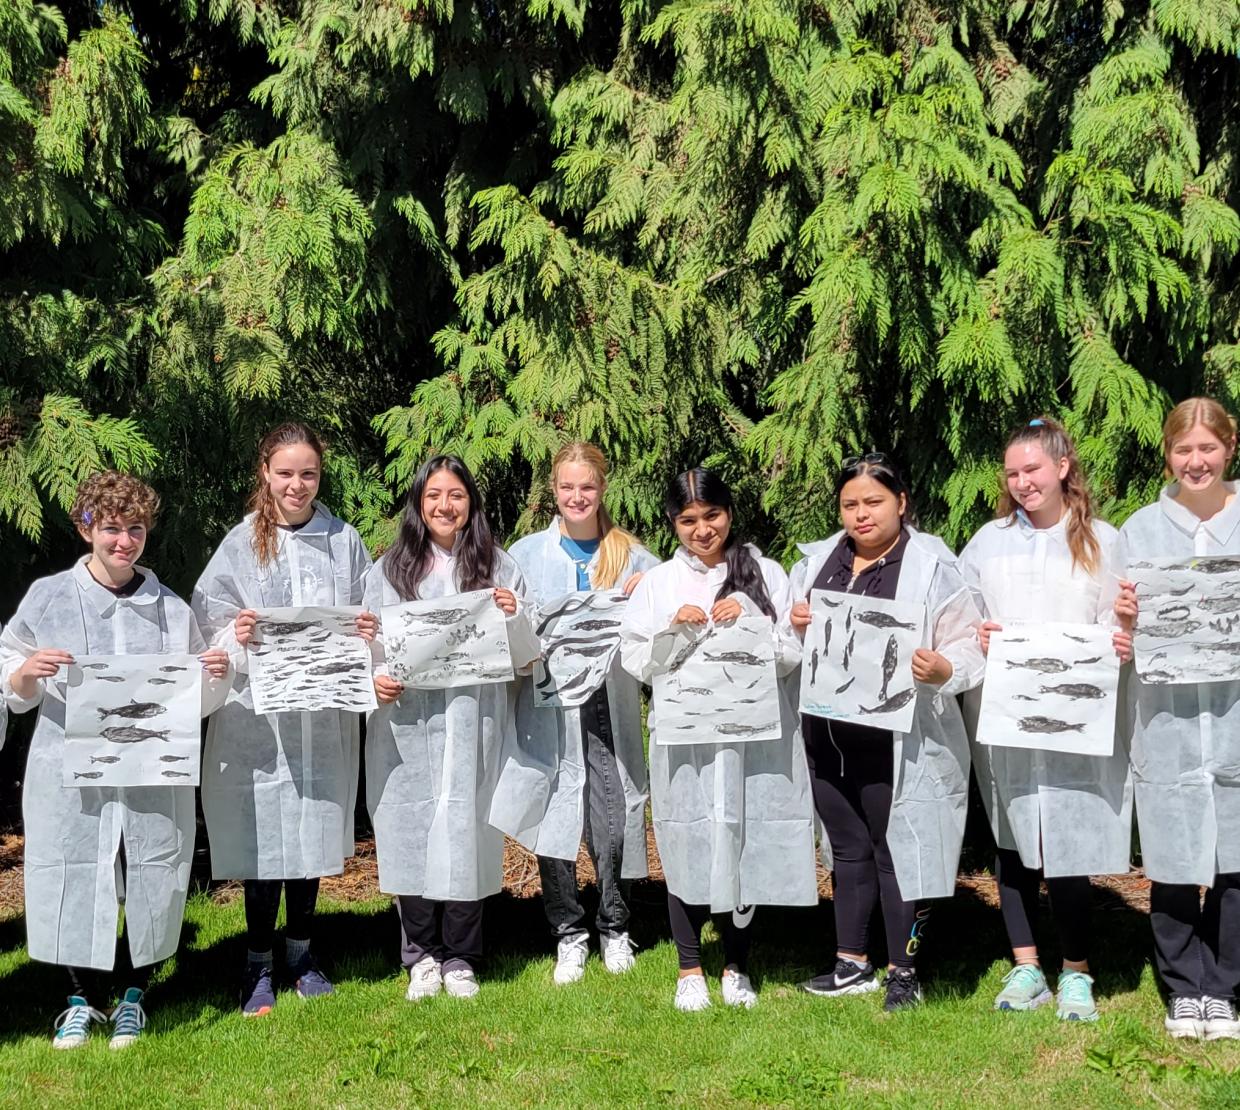 Students in lab coats pose for a group photo.